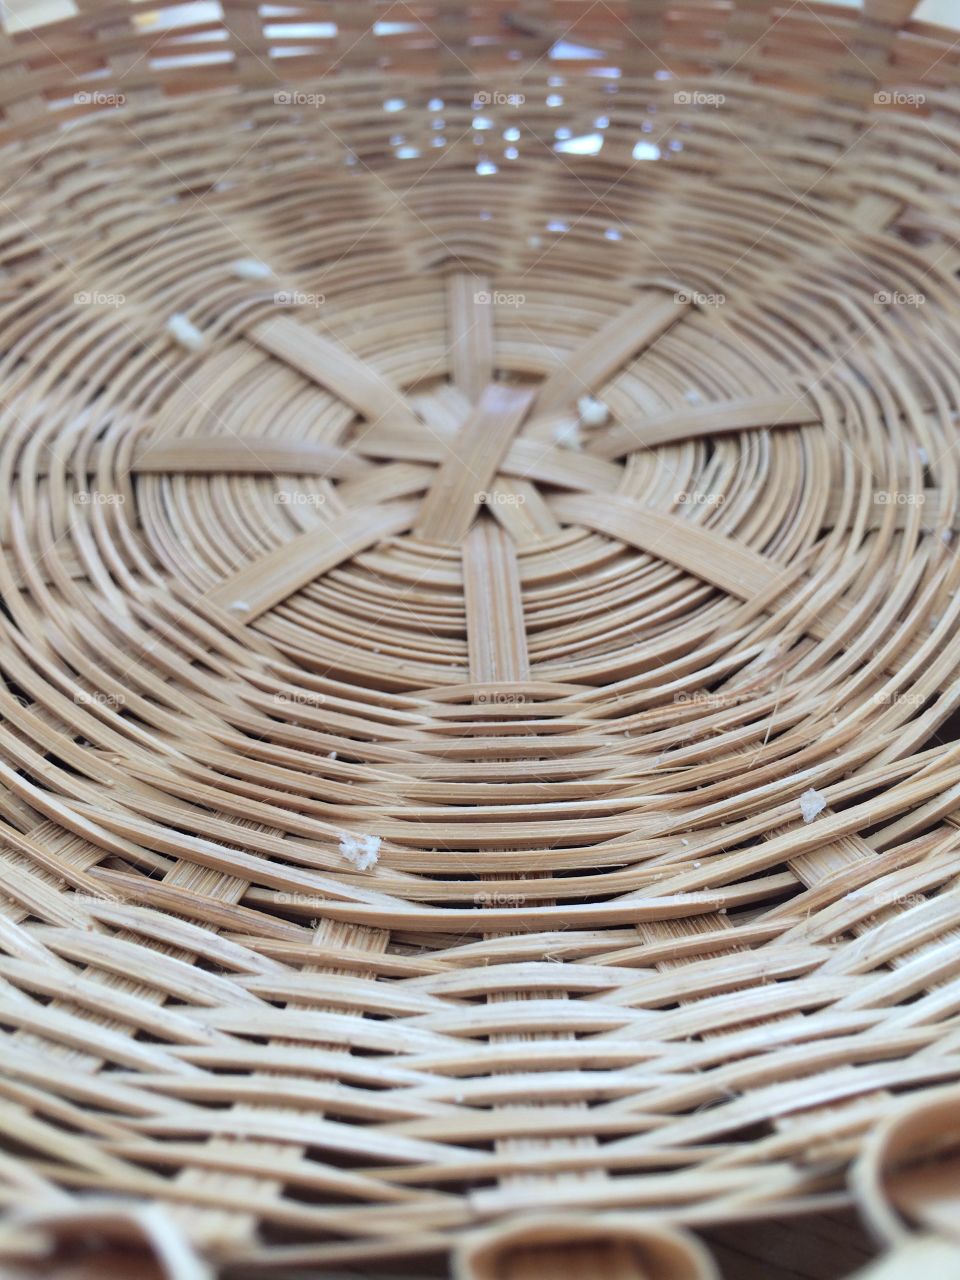 Hand-Woven Bread Basket. Hand-woven by a family member, this little basket always reminds me of a quiet life at home.